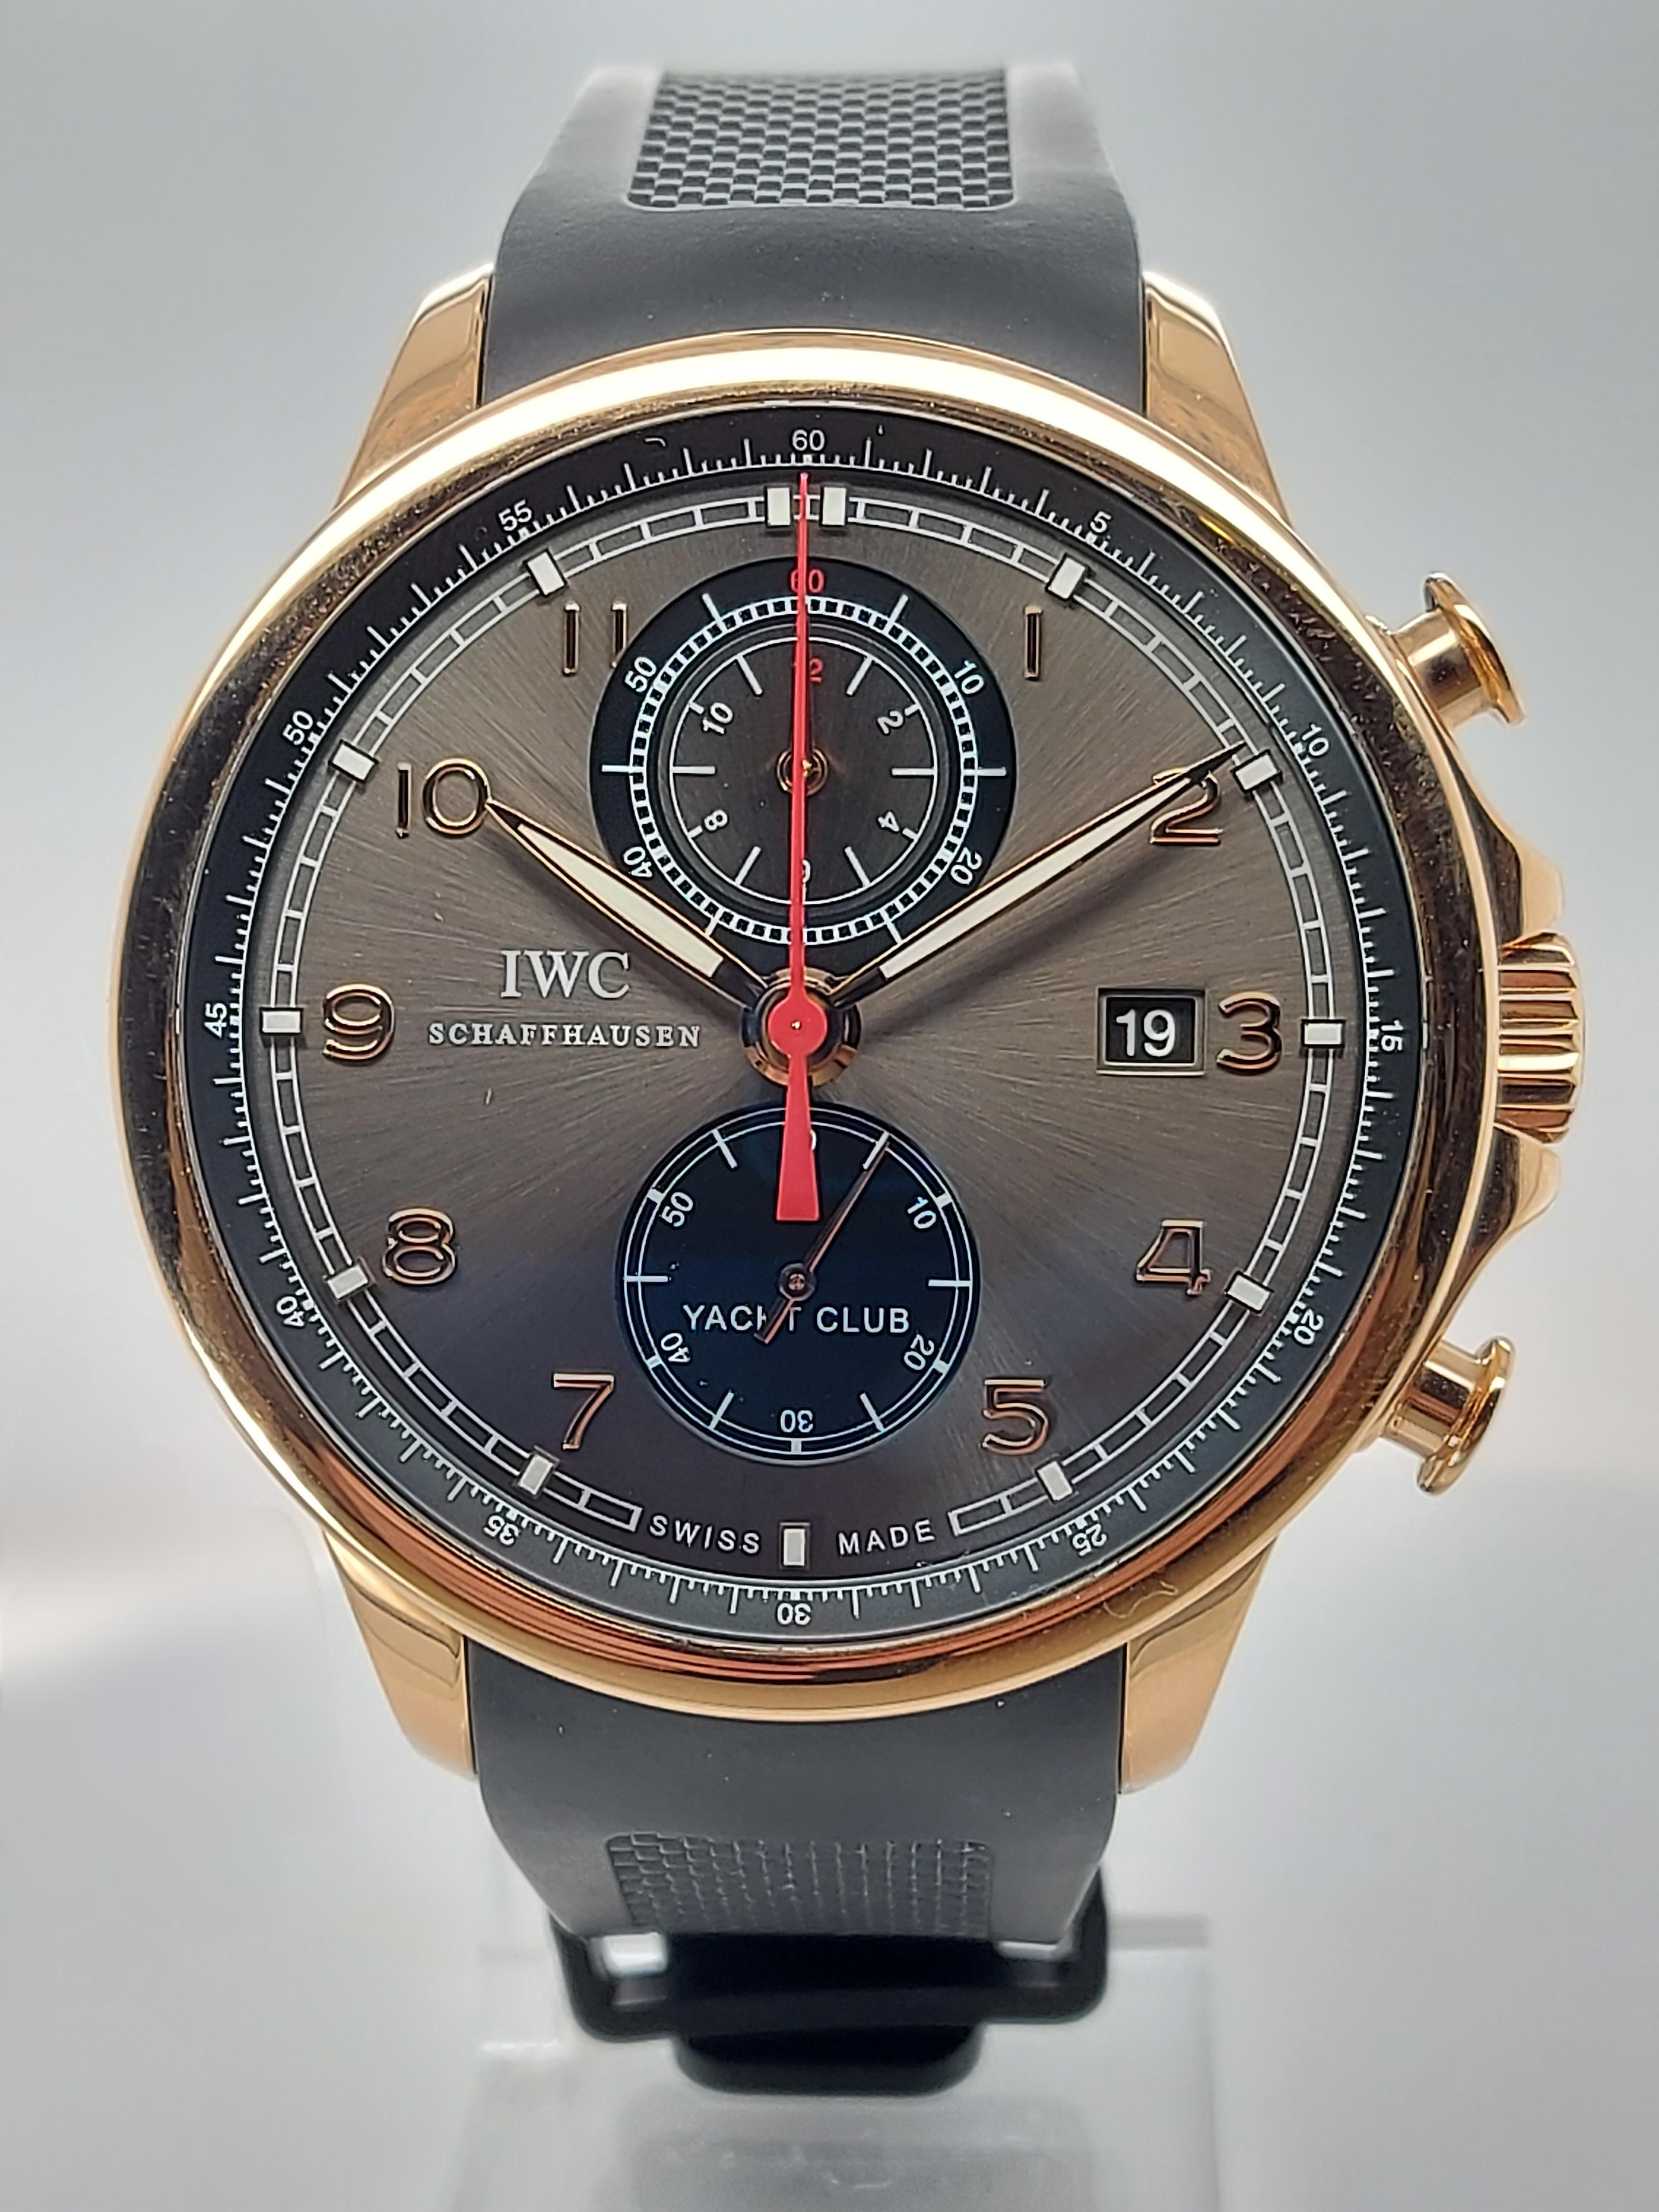 IWC Yacht Club Chronograph, Automatic, 18 kt Pink gold case, 45 mm With Box & Papers

Reference: IWC Yacht Club Chronograph,  	IW390209

Movement: Automatic, self winding, Power reserve 48 hours

Functions: Chronograph function with hours, minutes,